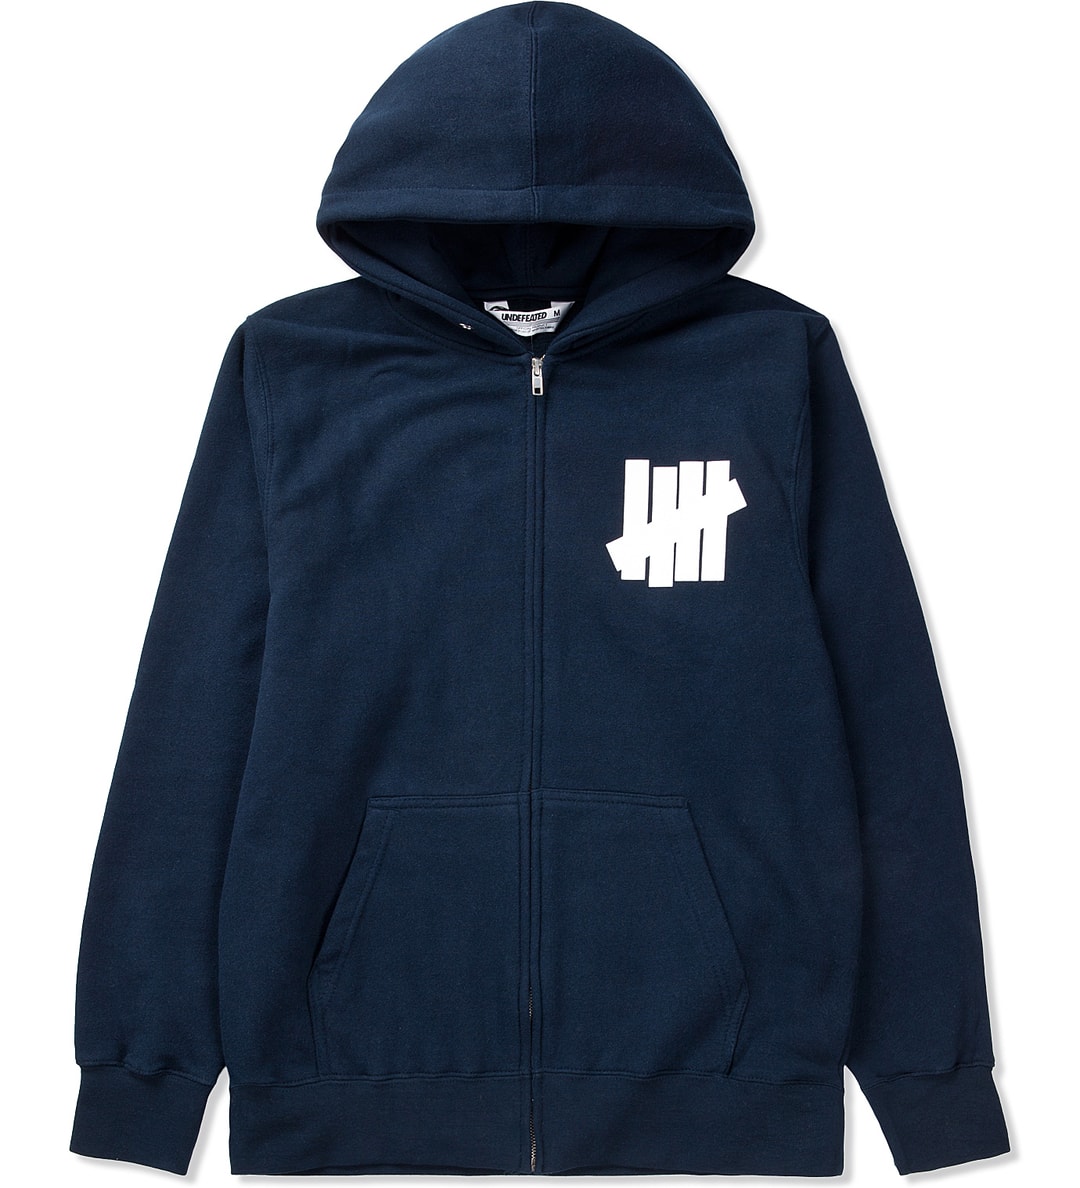 Undefeated - Navy 5 Strike Zip Hoodie | HBX - Globally Curated Fashion ...